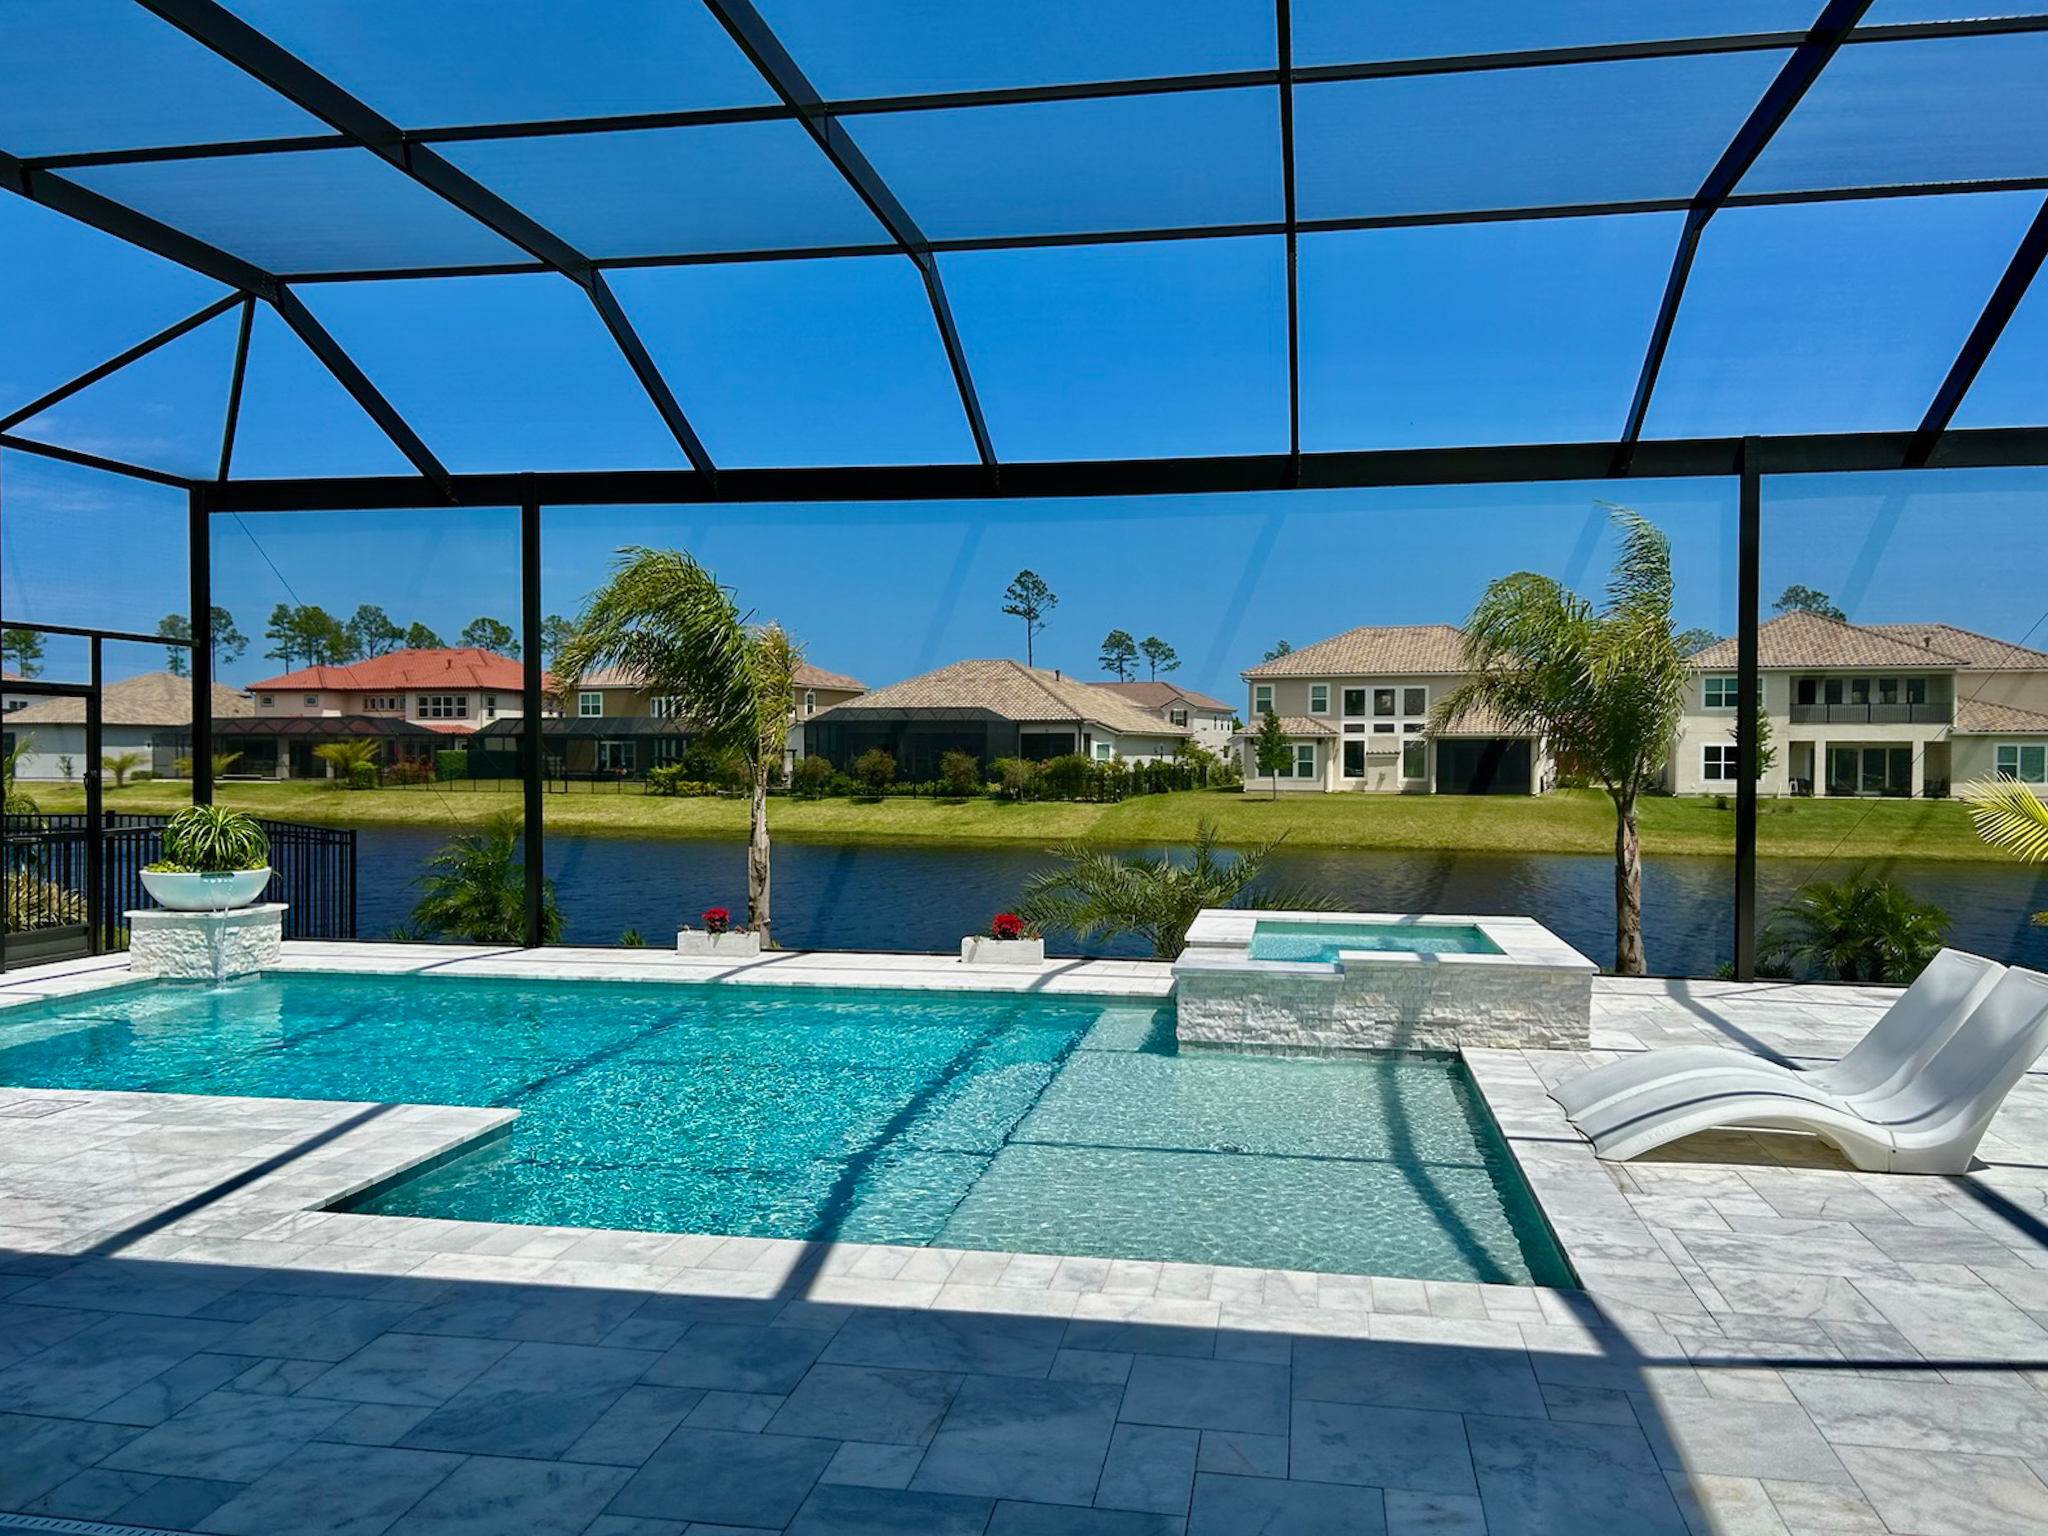 A tropical pool in Jacksonville Florida with a UV protective pool screen enclosure made by Screen Enclosures and More.